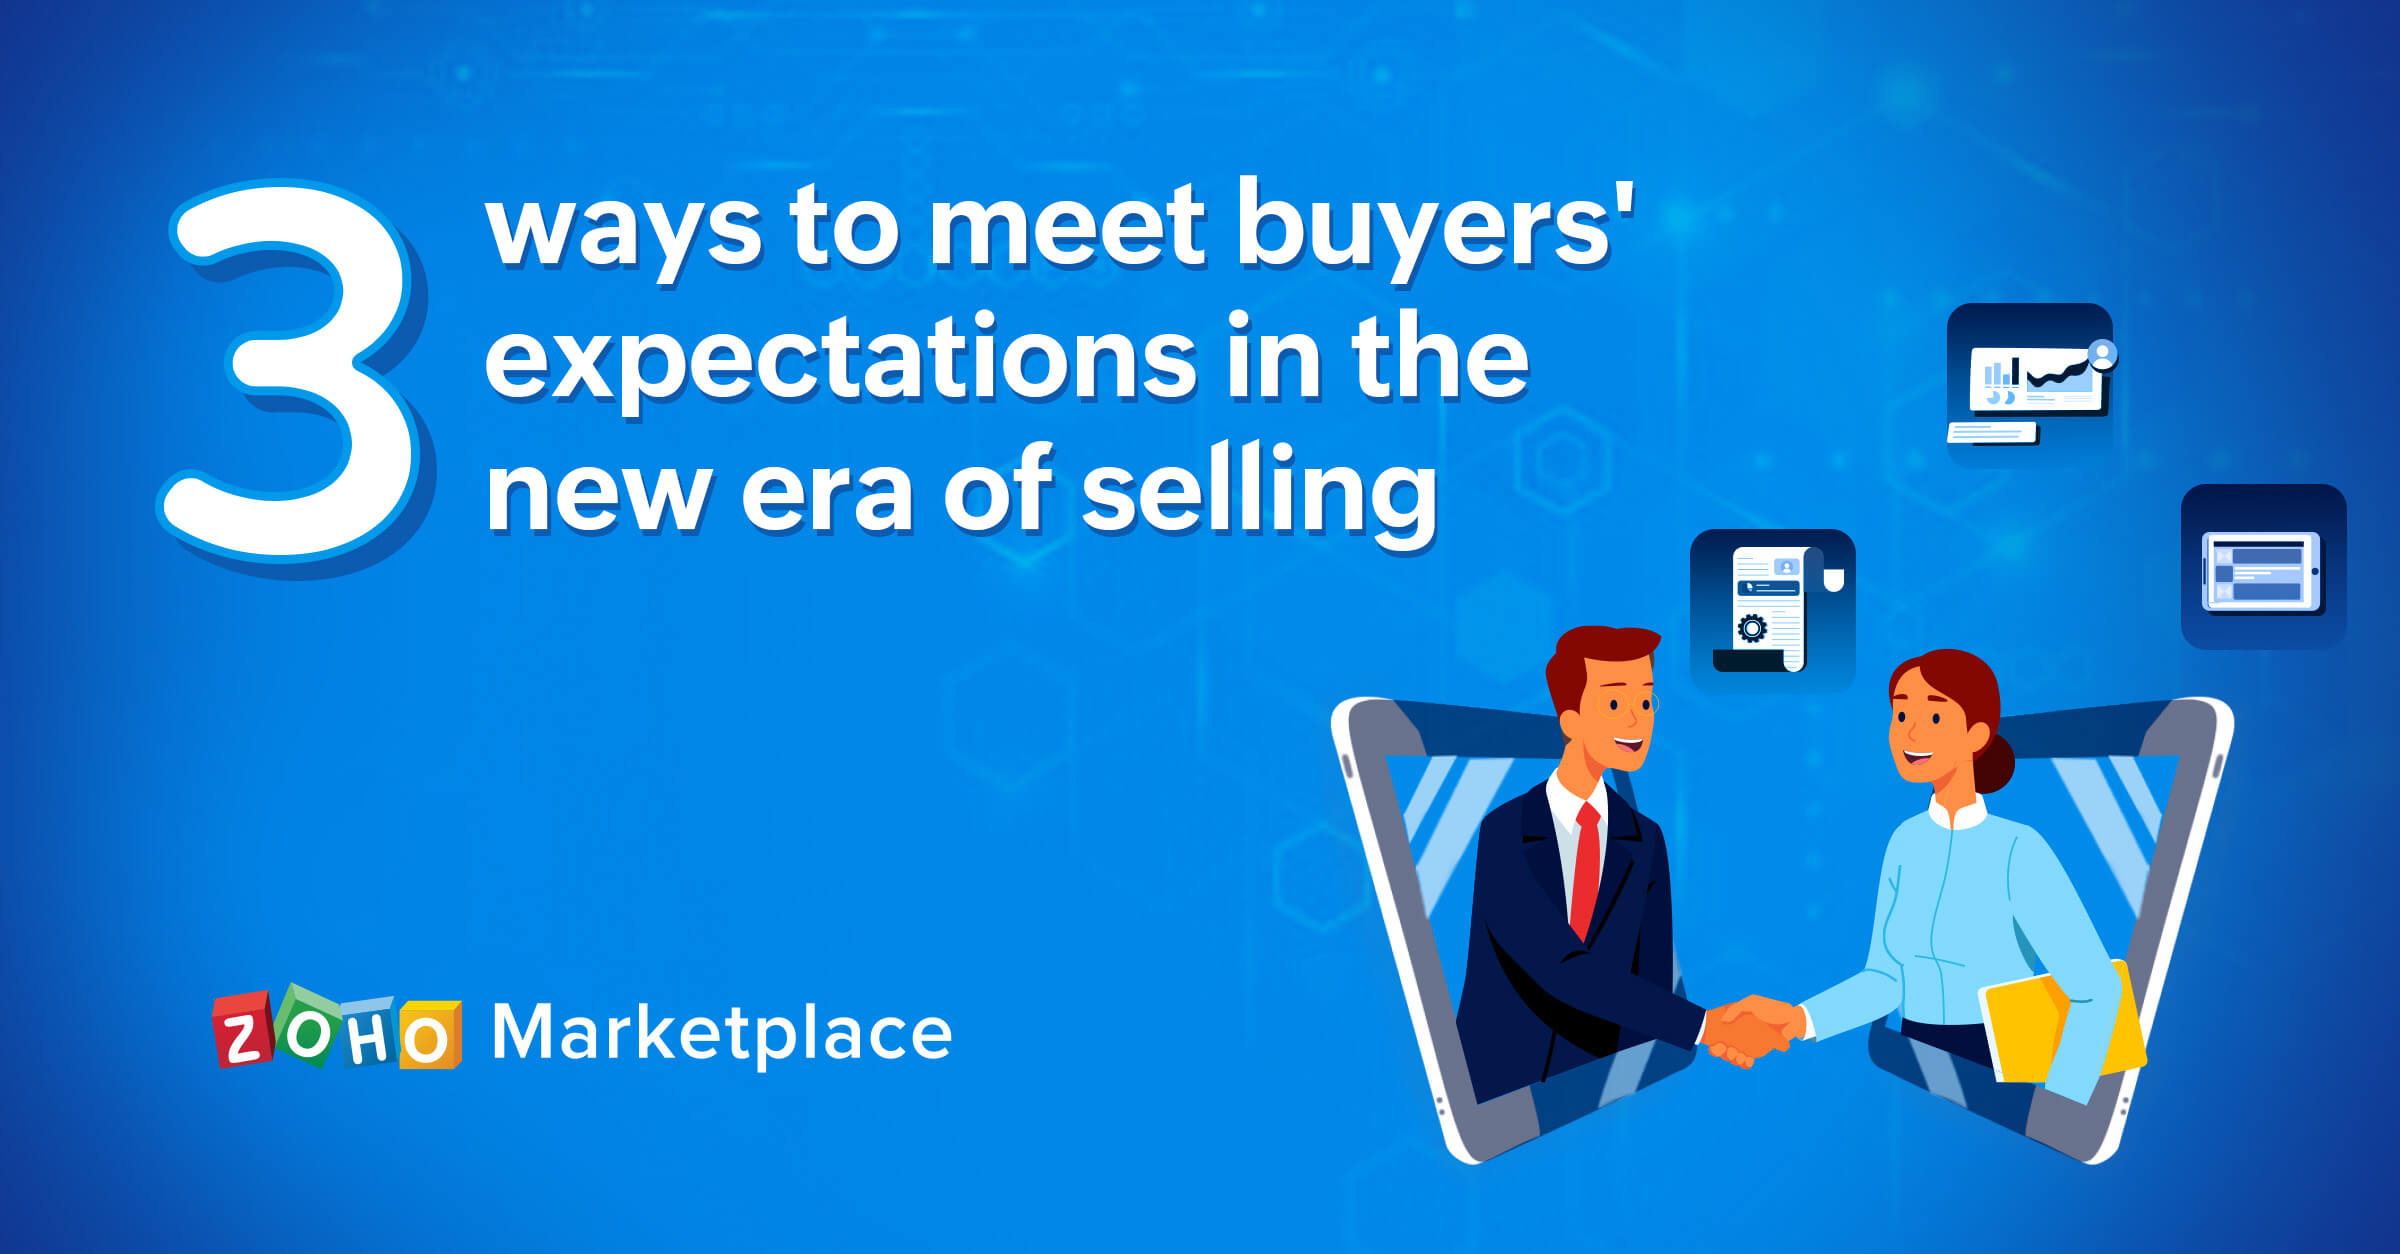 3 ways to meet buyers' expectations in the new era of selling